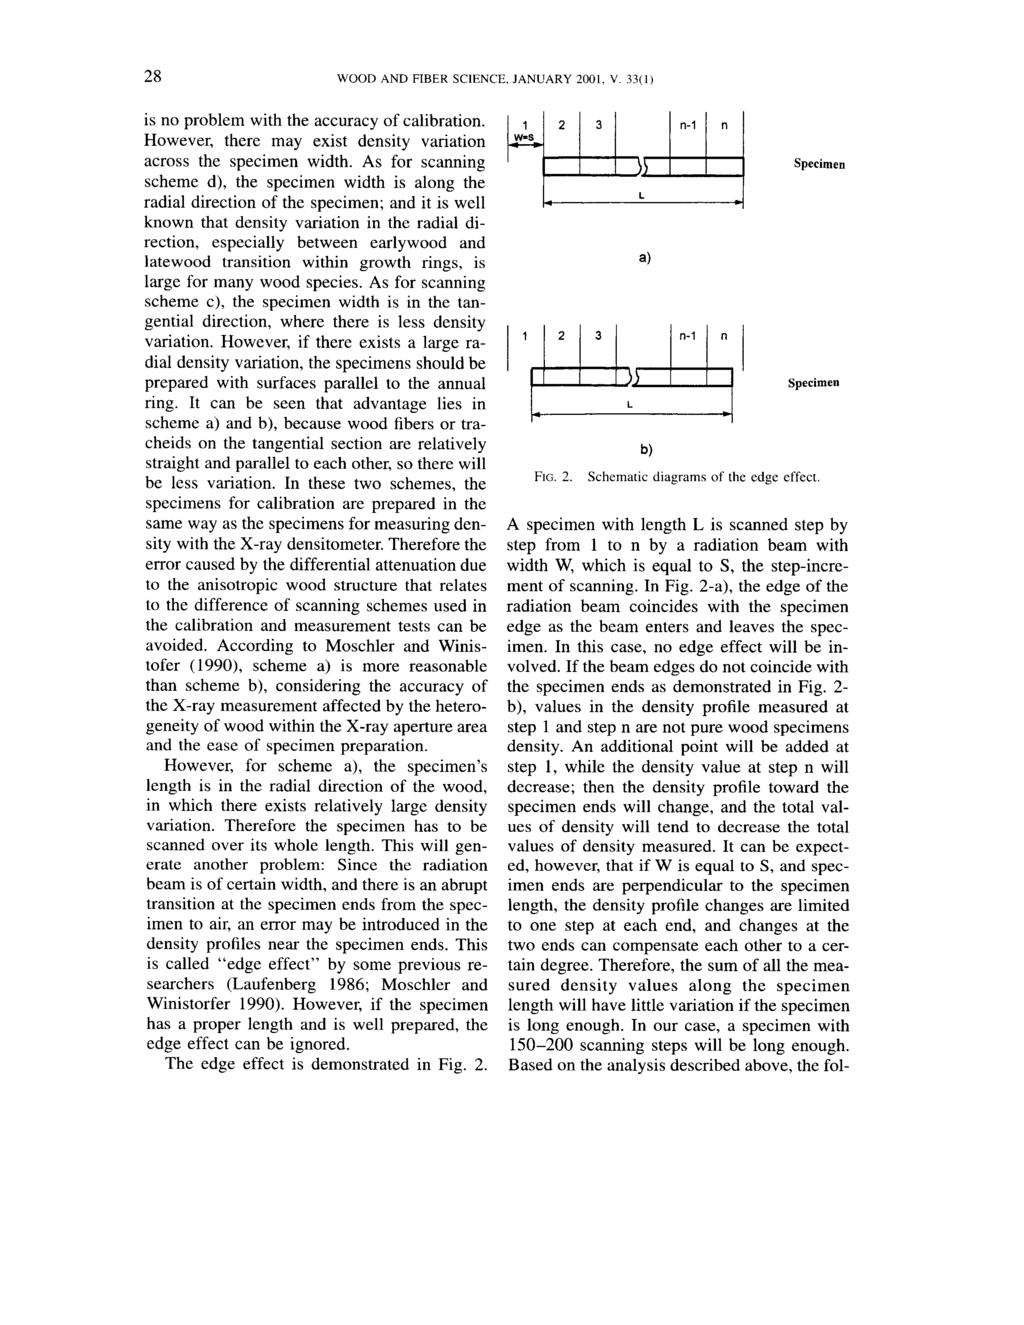 28 WOOD AND FIBER SCIENCE, JANUARY 2001, V. 33(1) W Specimen is no problem with the accuracy of calibration. However, there may exist density variation across the specimen width.